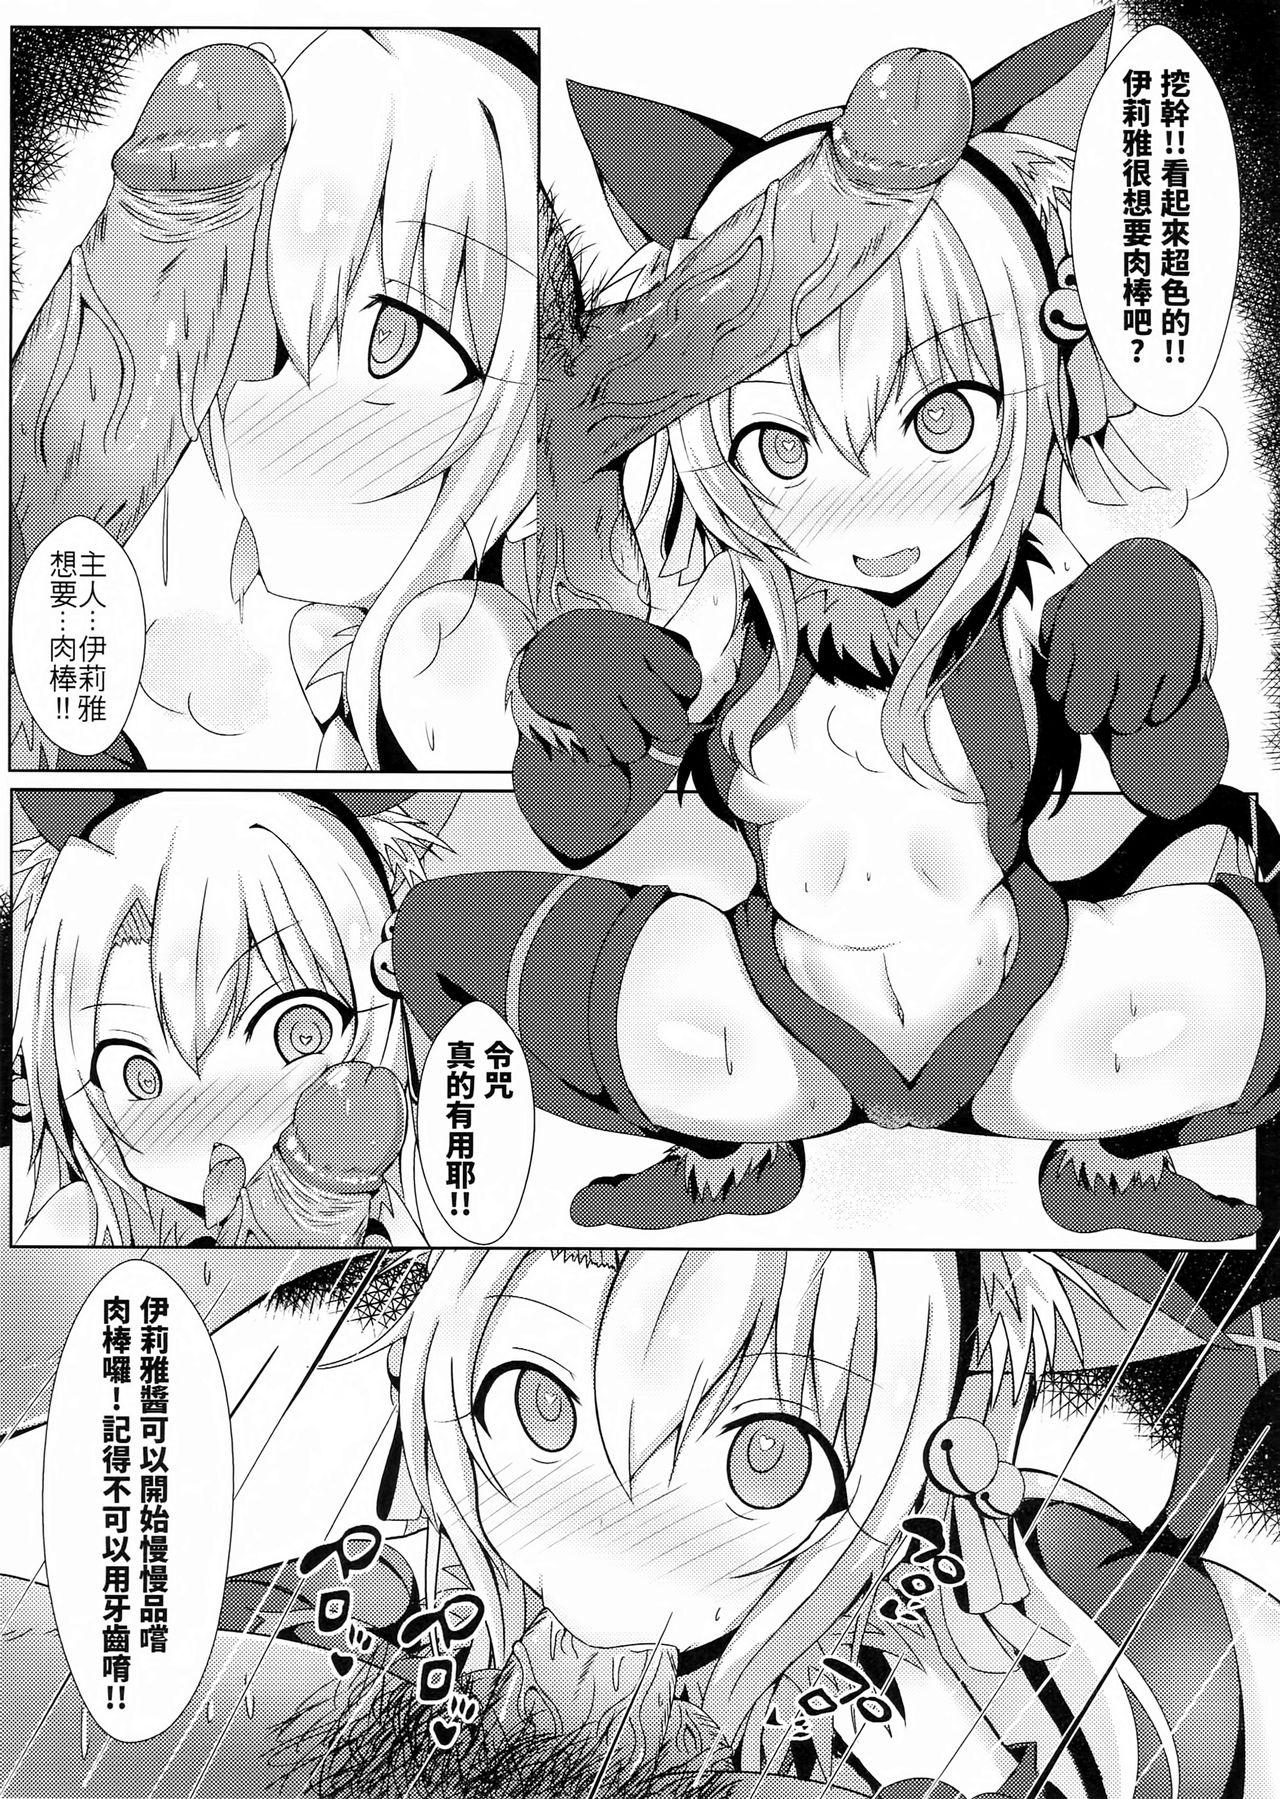 Amateurs Gone Wild 魔法公廁★伊利雅FUCK抽不到！！我什麼都沒有！！ - Fate grand order Unshaved - Page 4